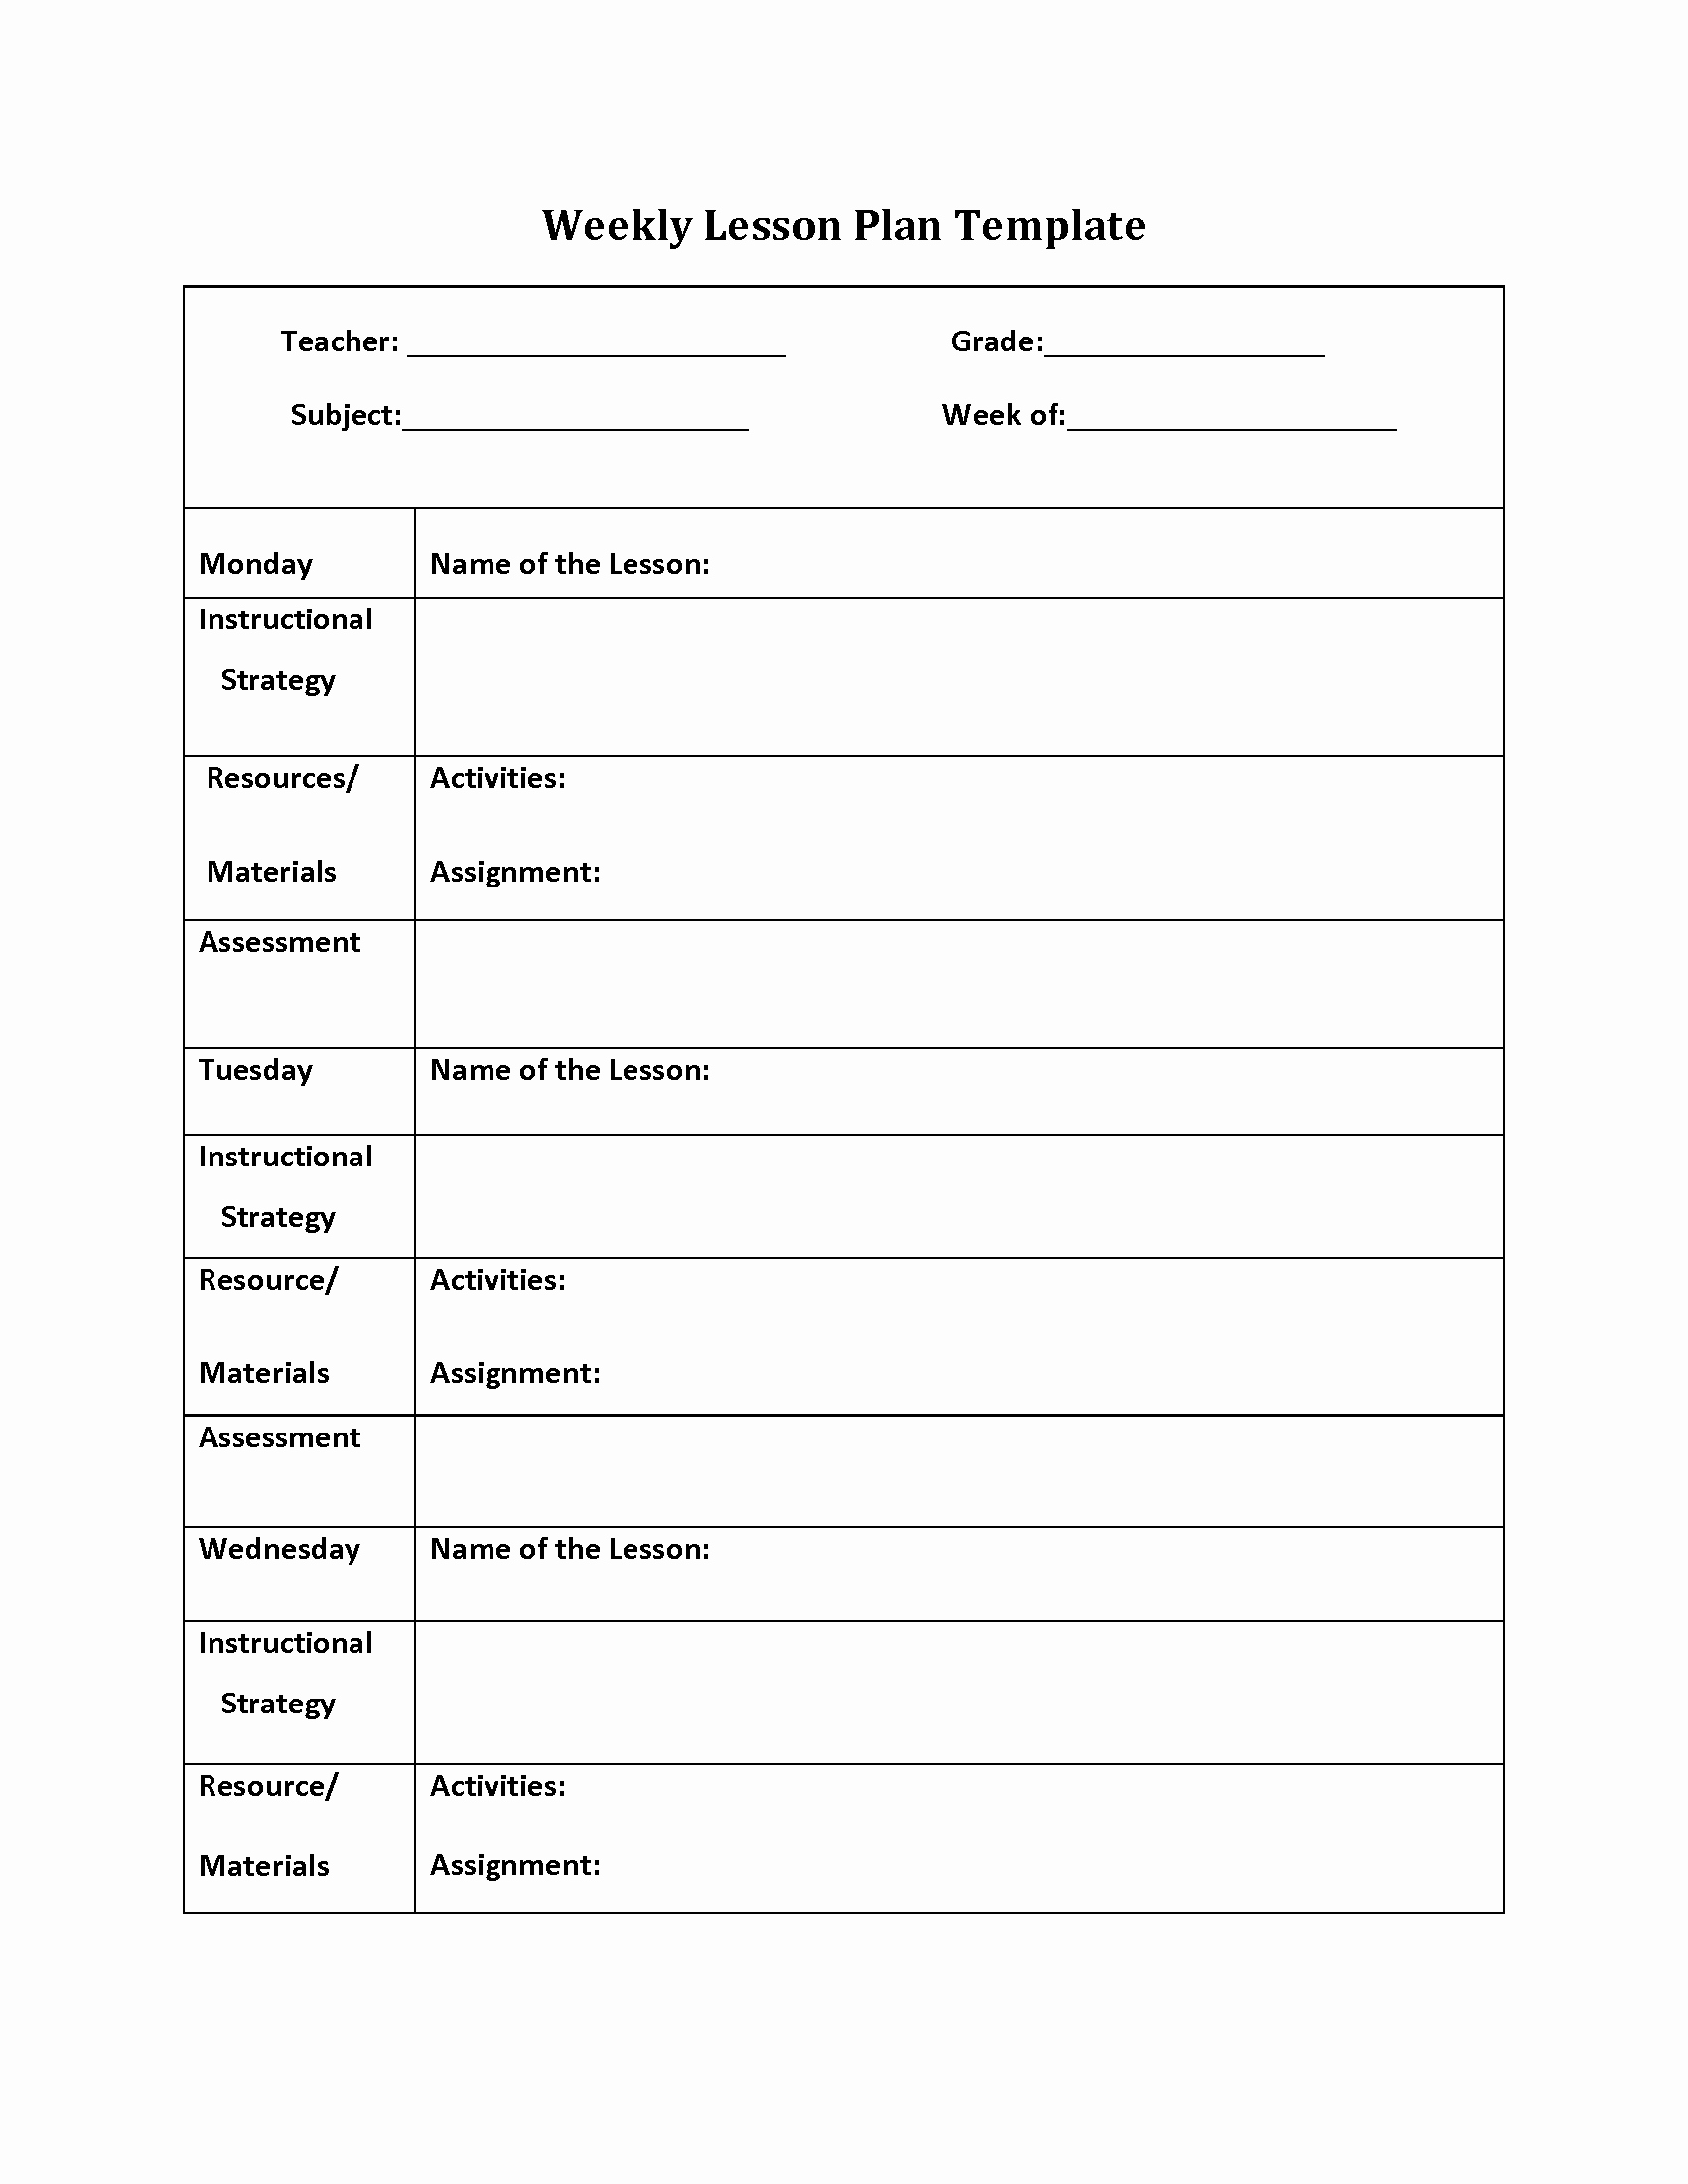 Lesson Plan Template Google Doc Elegant Weekly Lesson Planner Template Excel Plan Microsoft Word